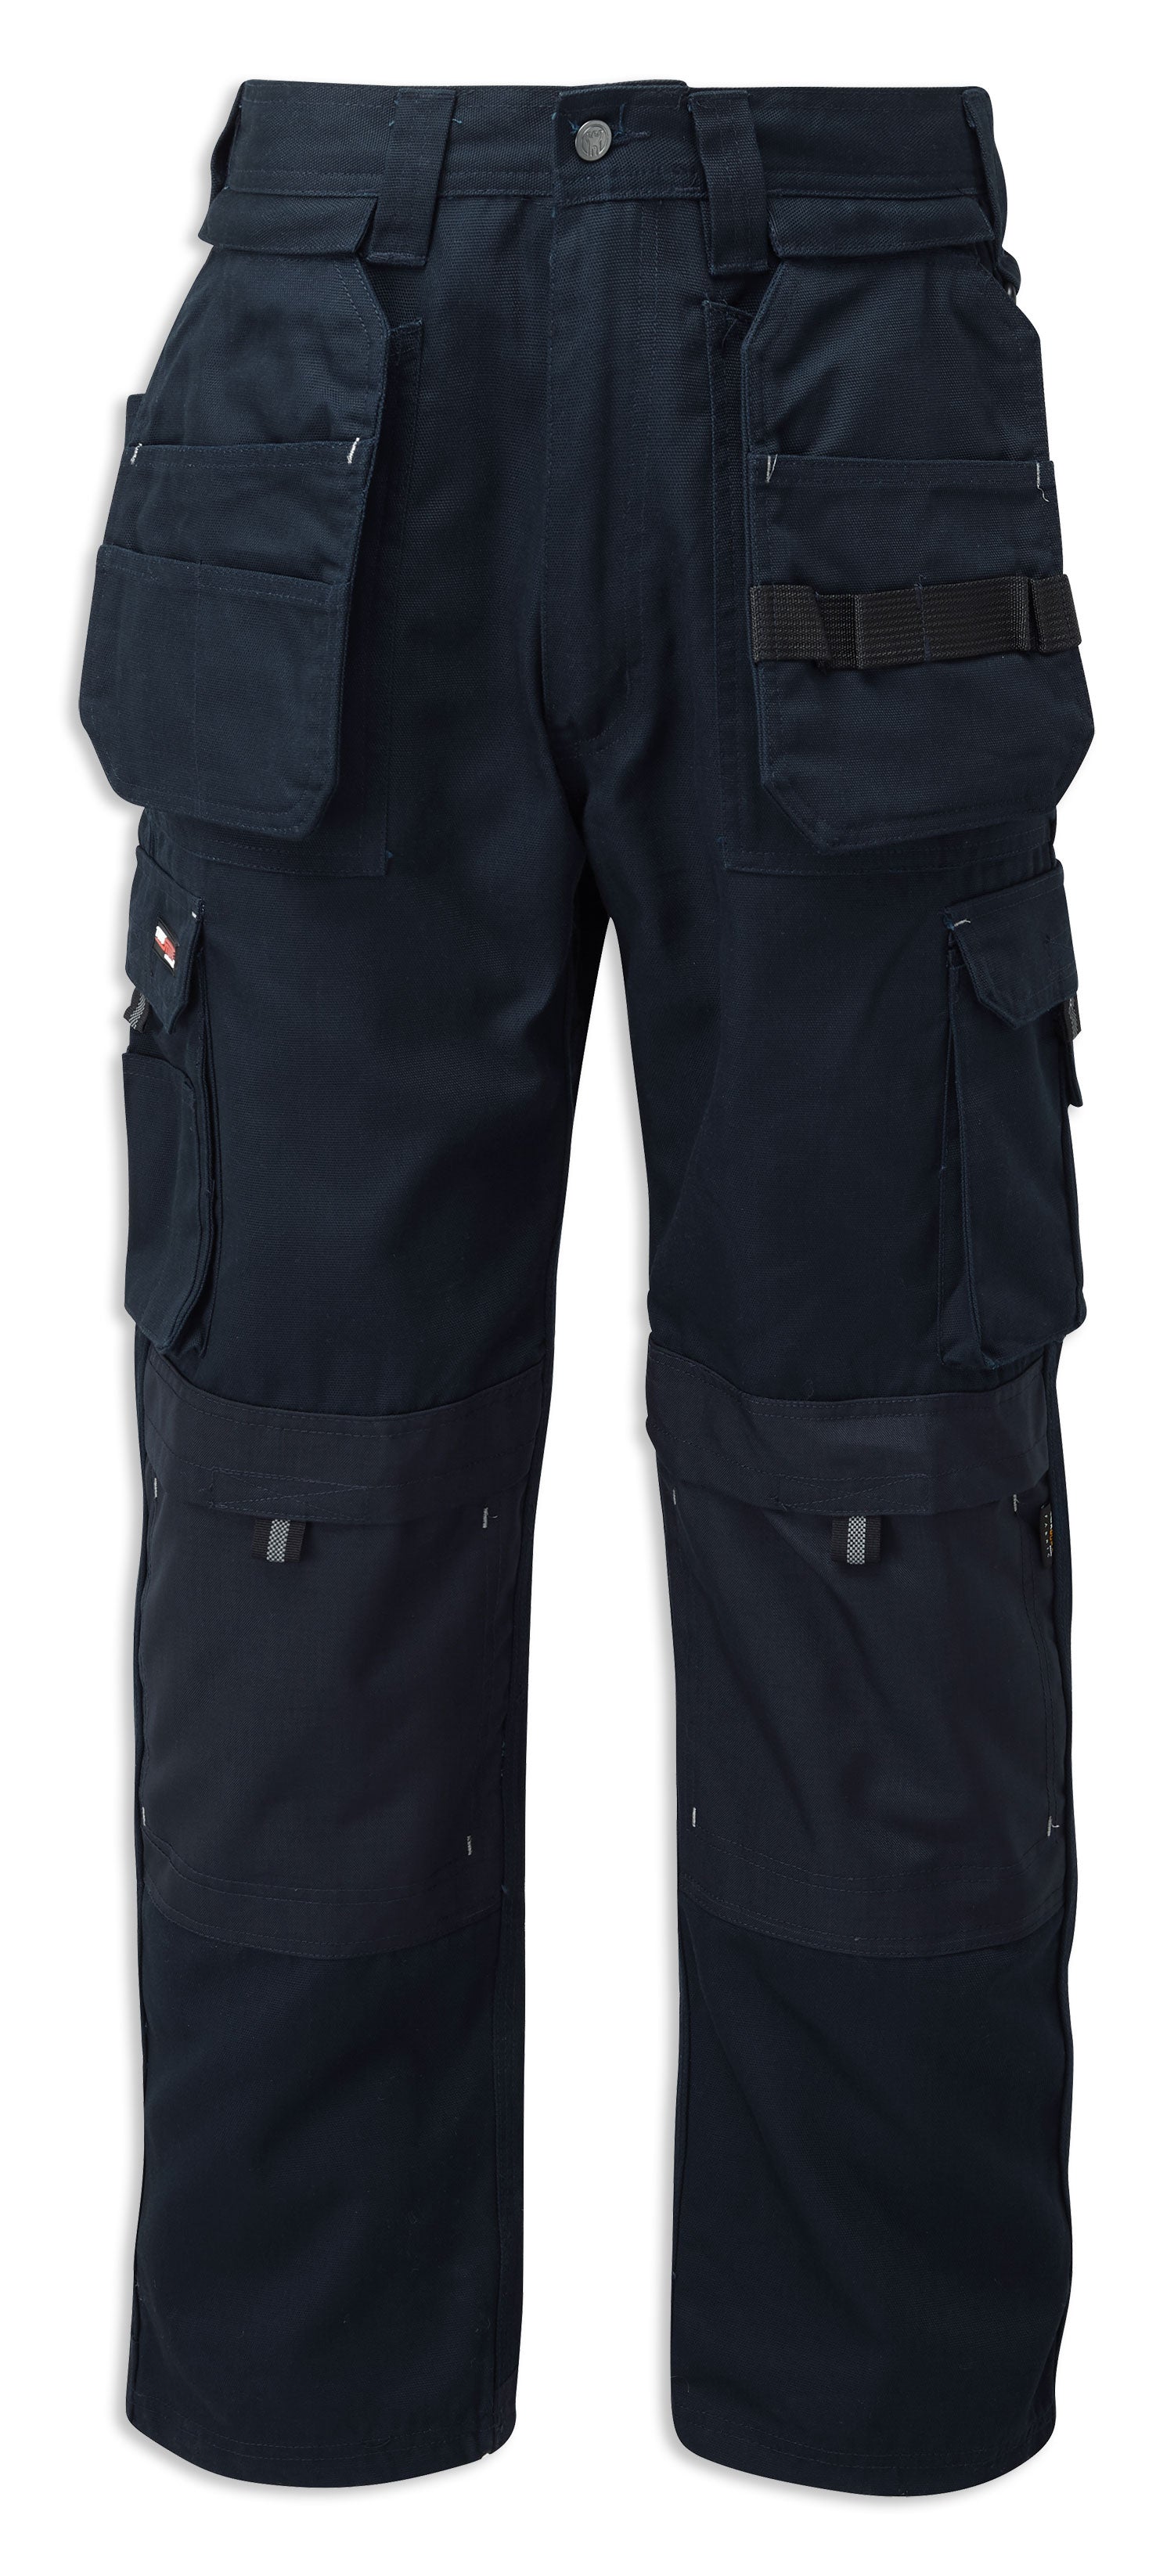 Navy Castle Tuffstuff Extreme Work Trousers